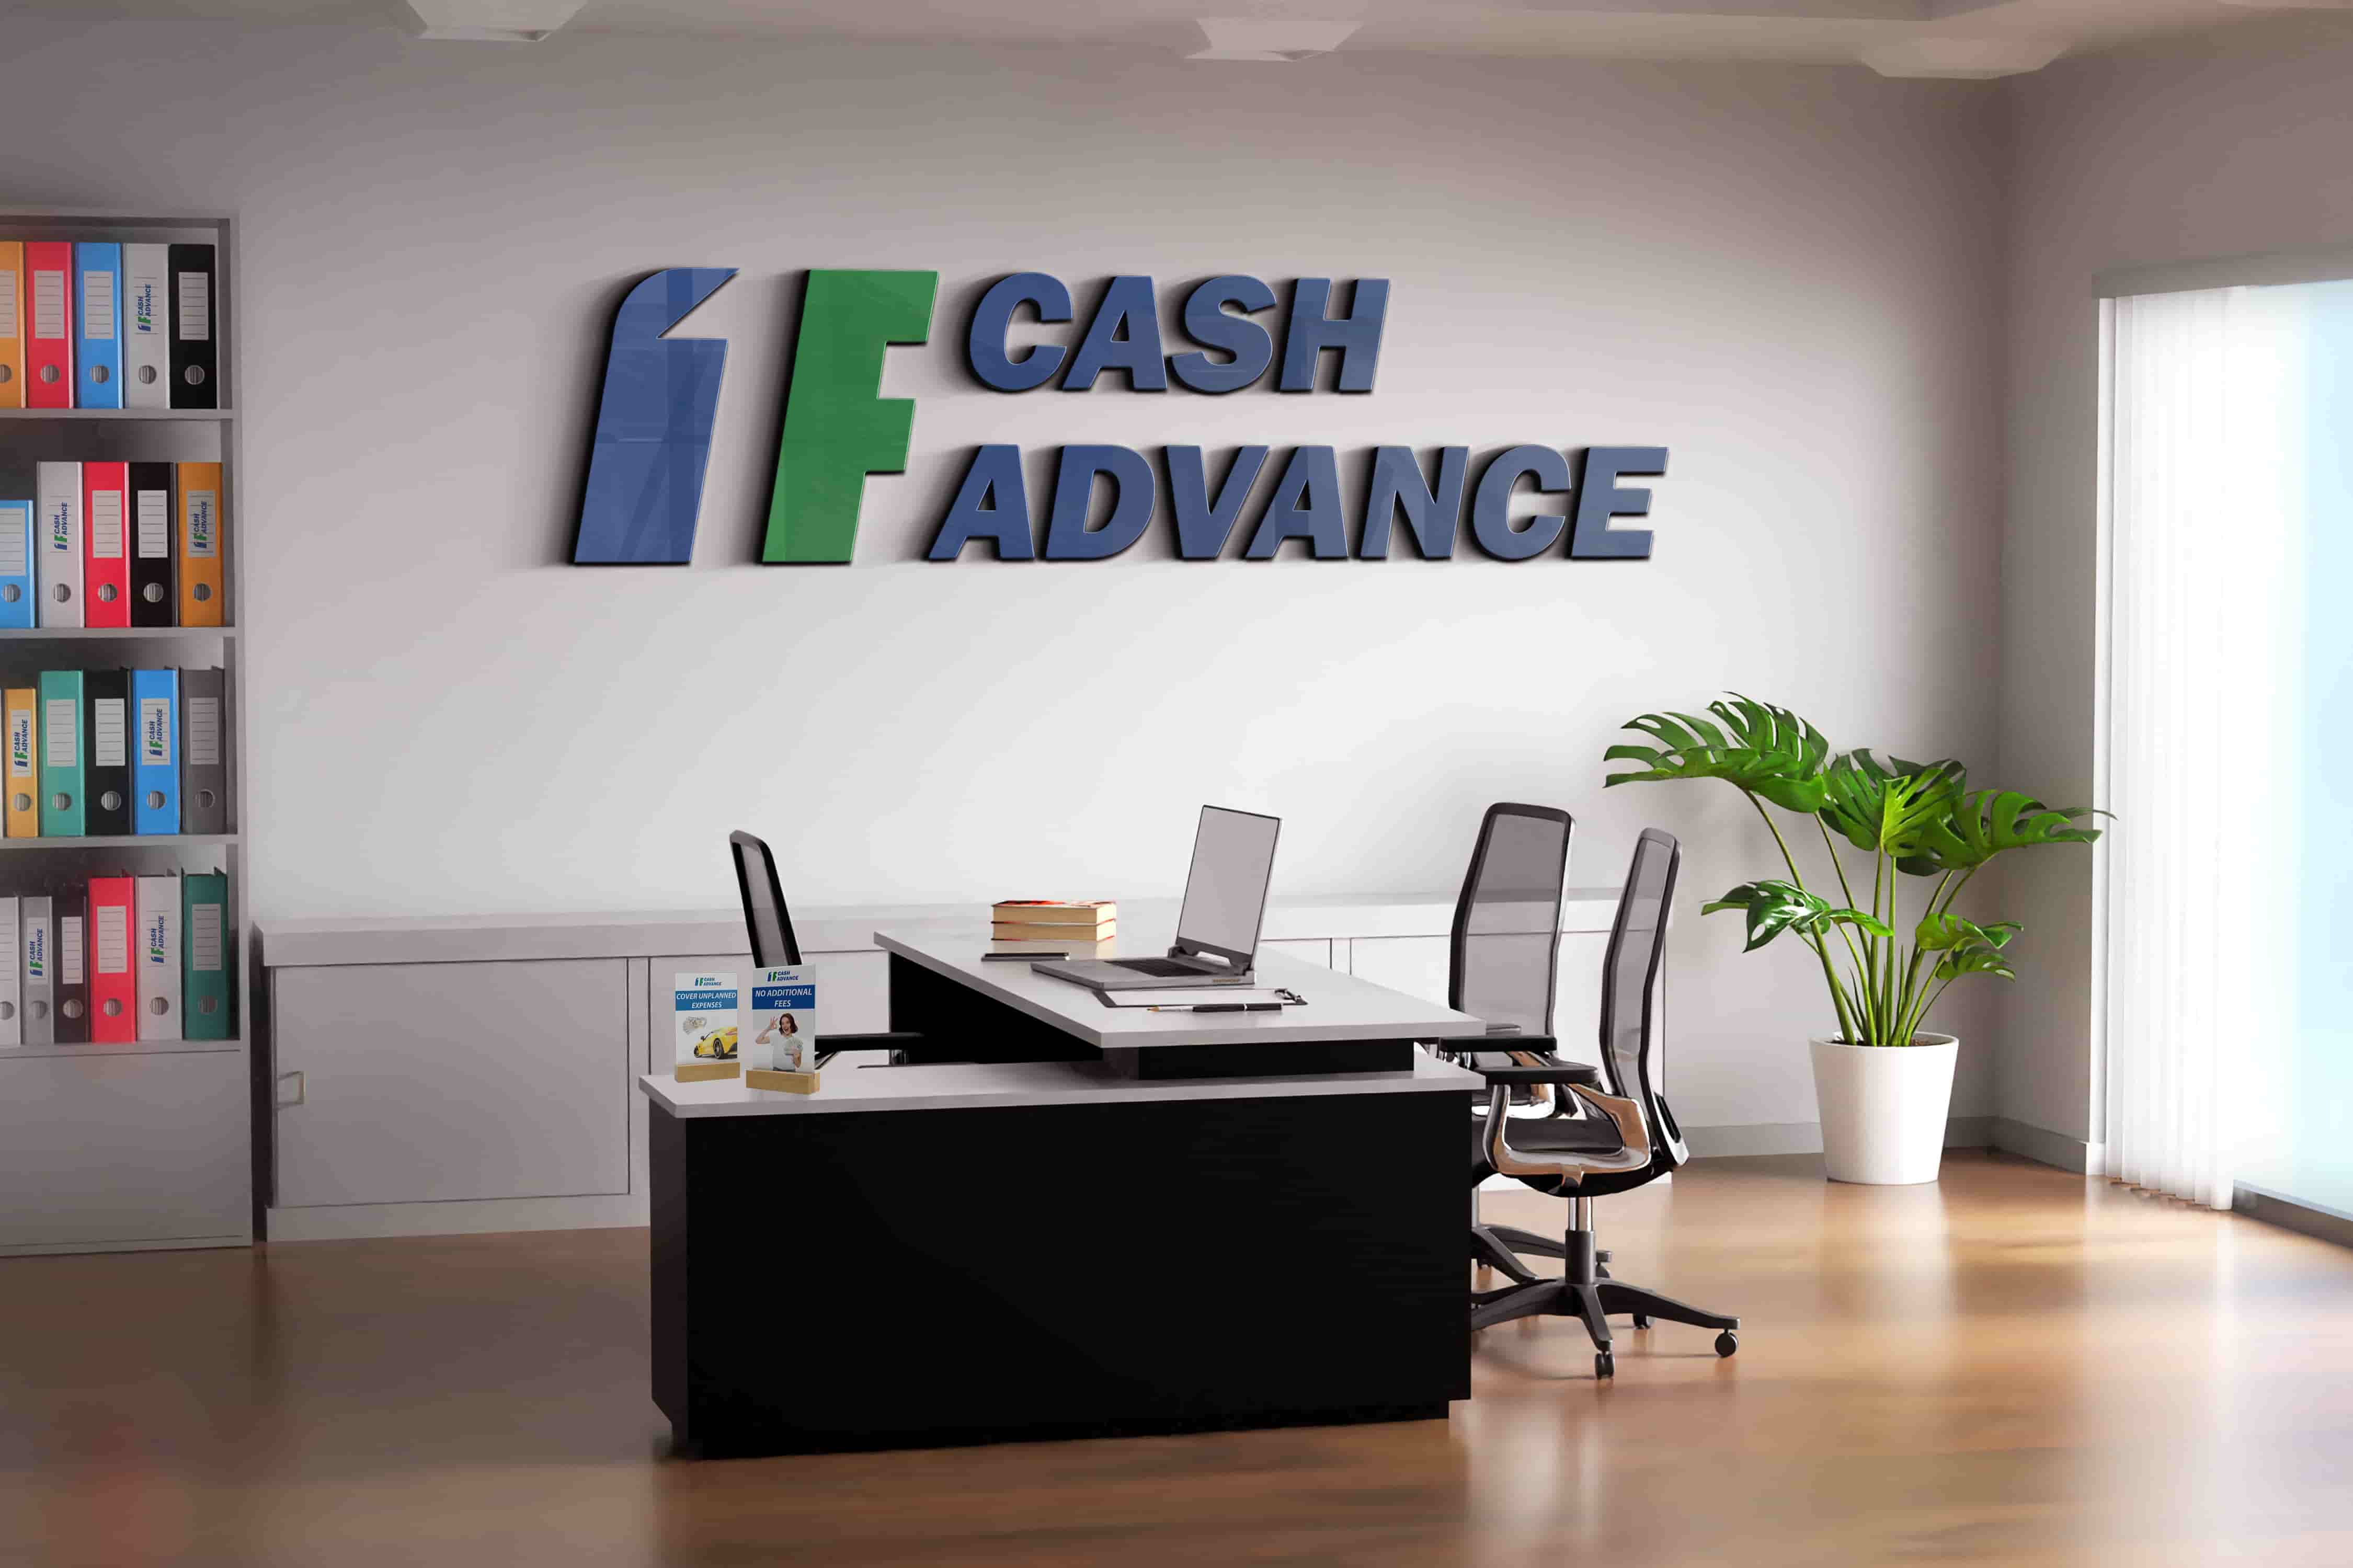 Cash advance loans in Cleveland, OH